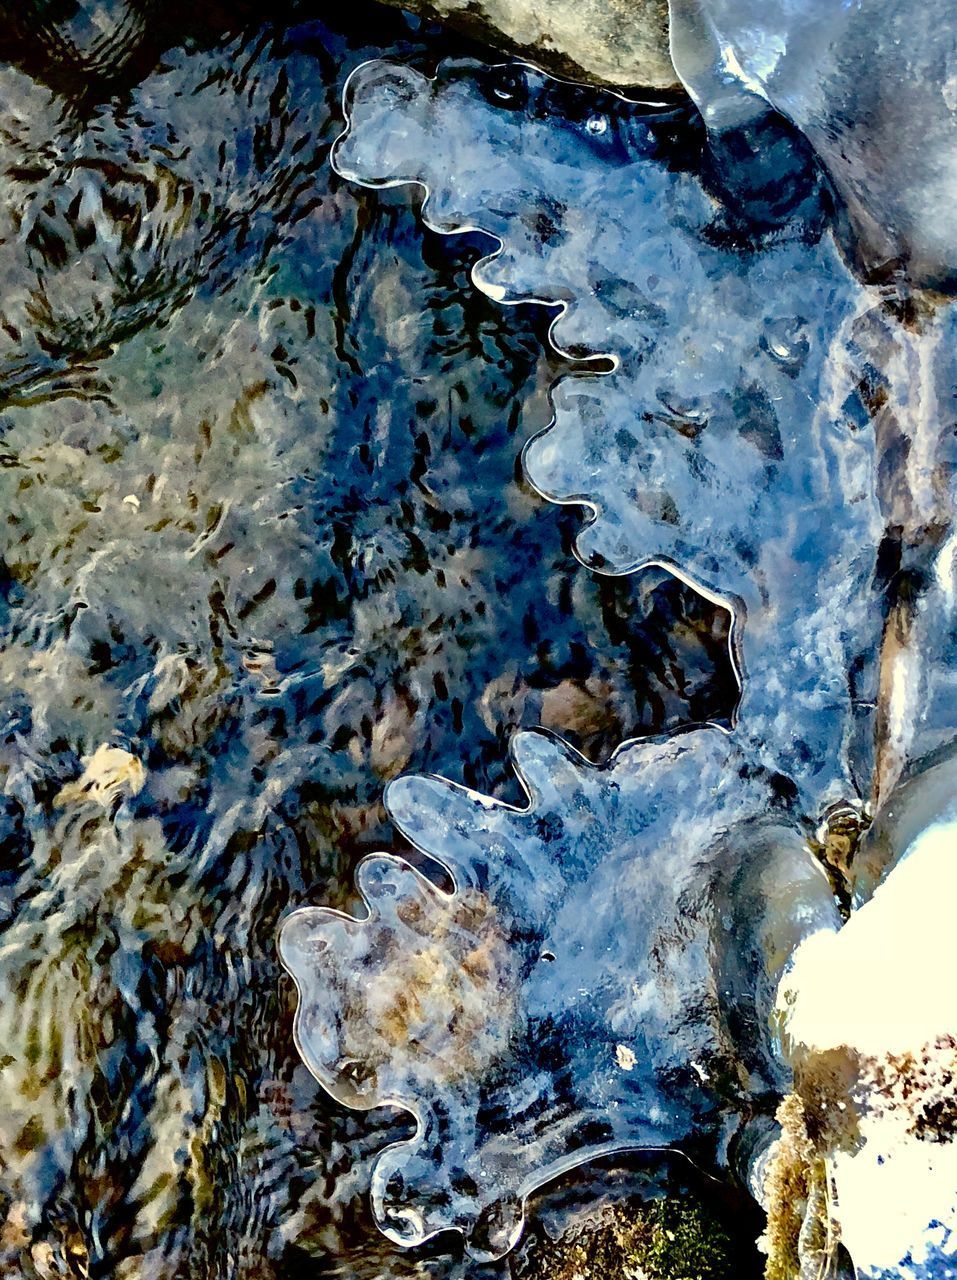 CLOSE-UP OF FROZEN WATER